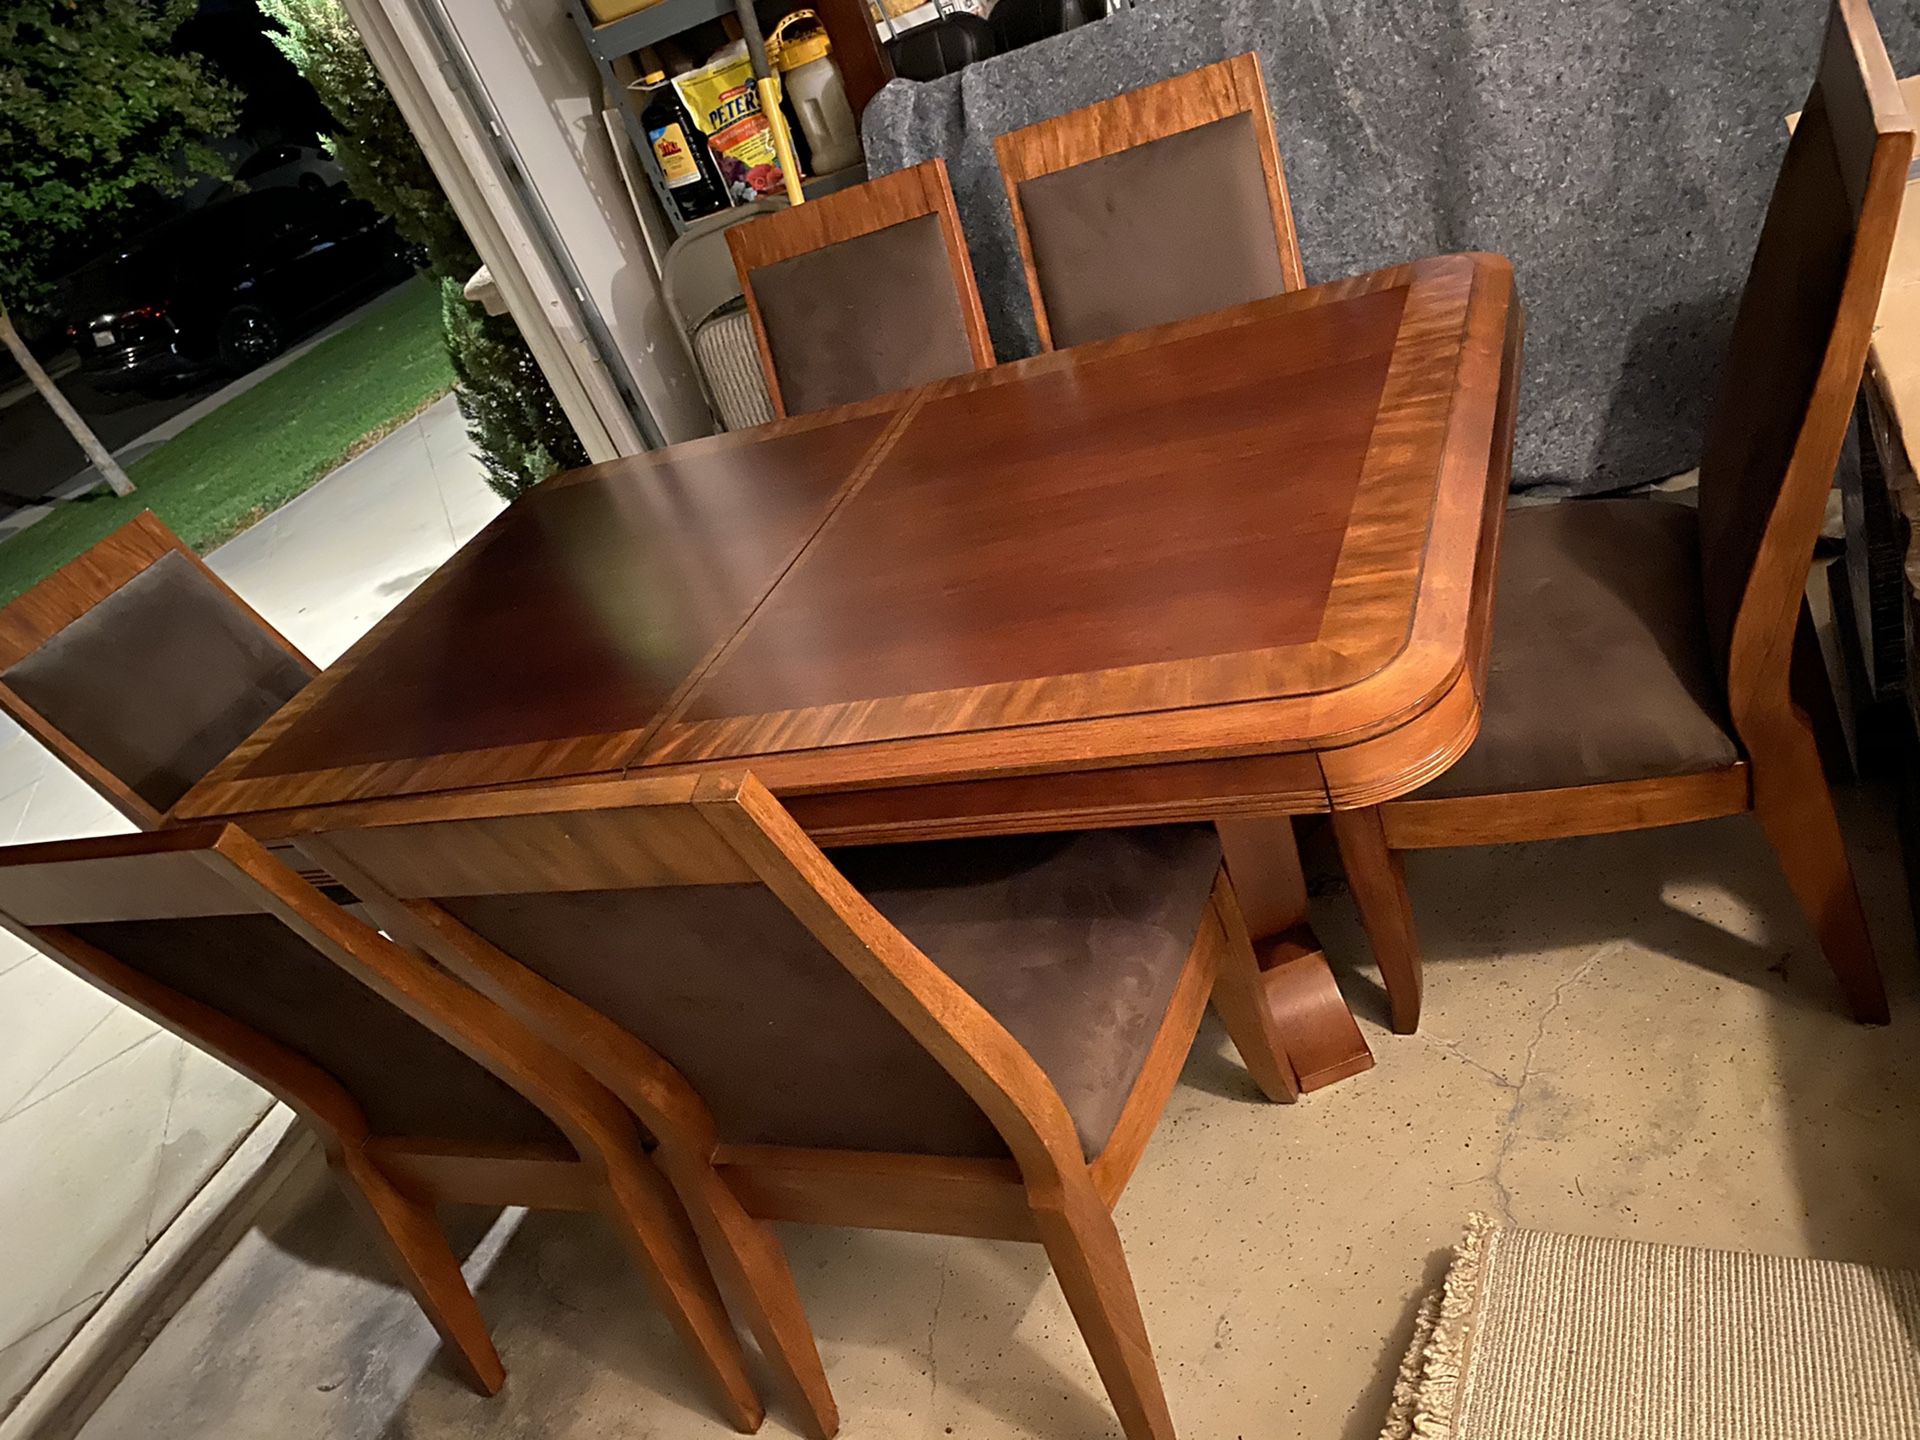 Pottery Barn dining table